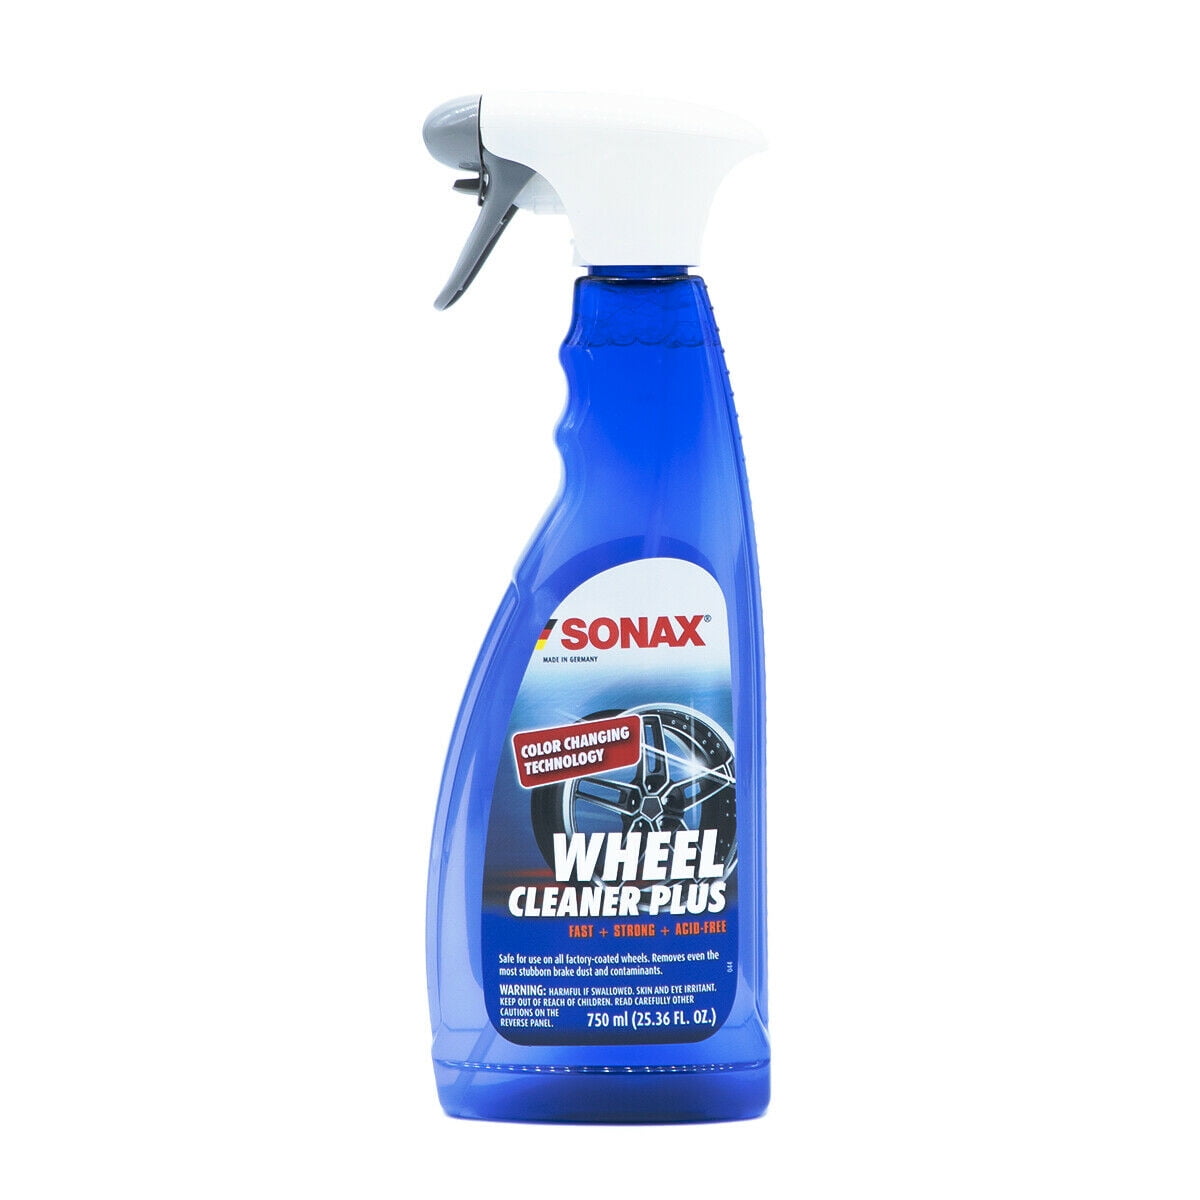 SONAX Wheel Cleaner Acid Free 5 liter - Jerry Can - CROP